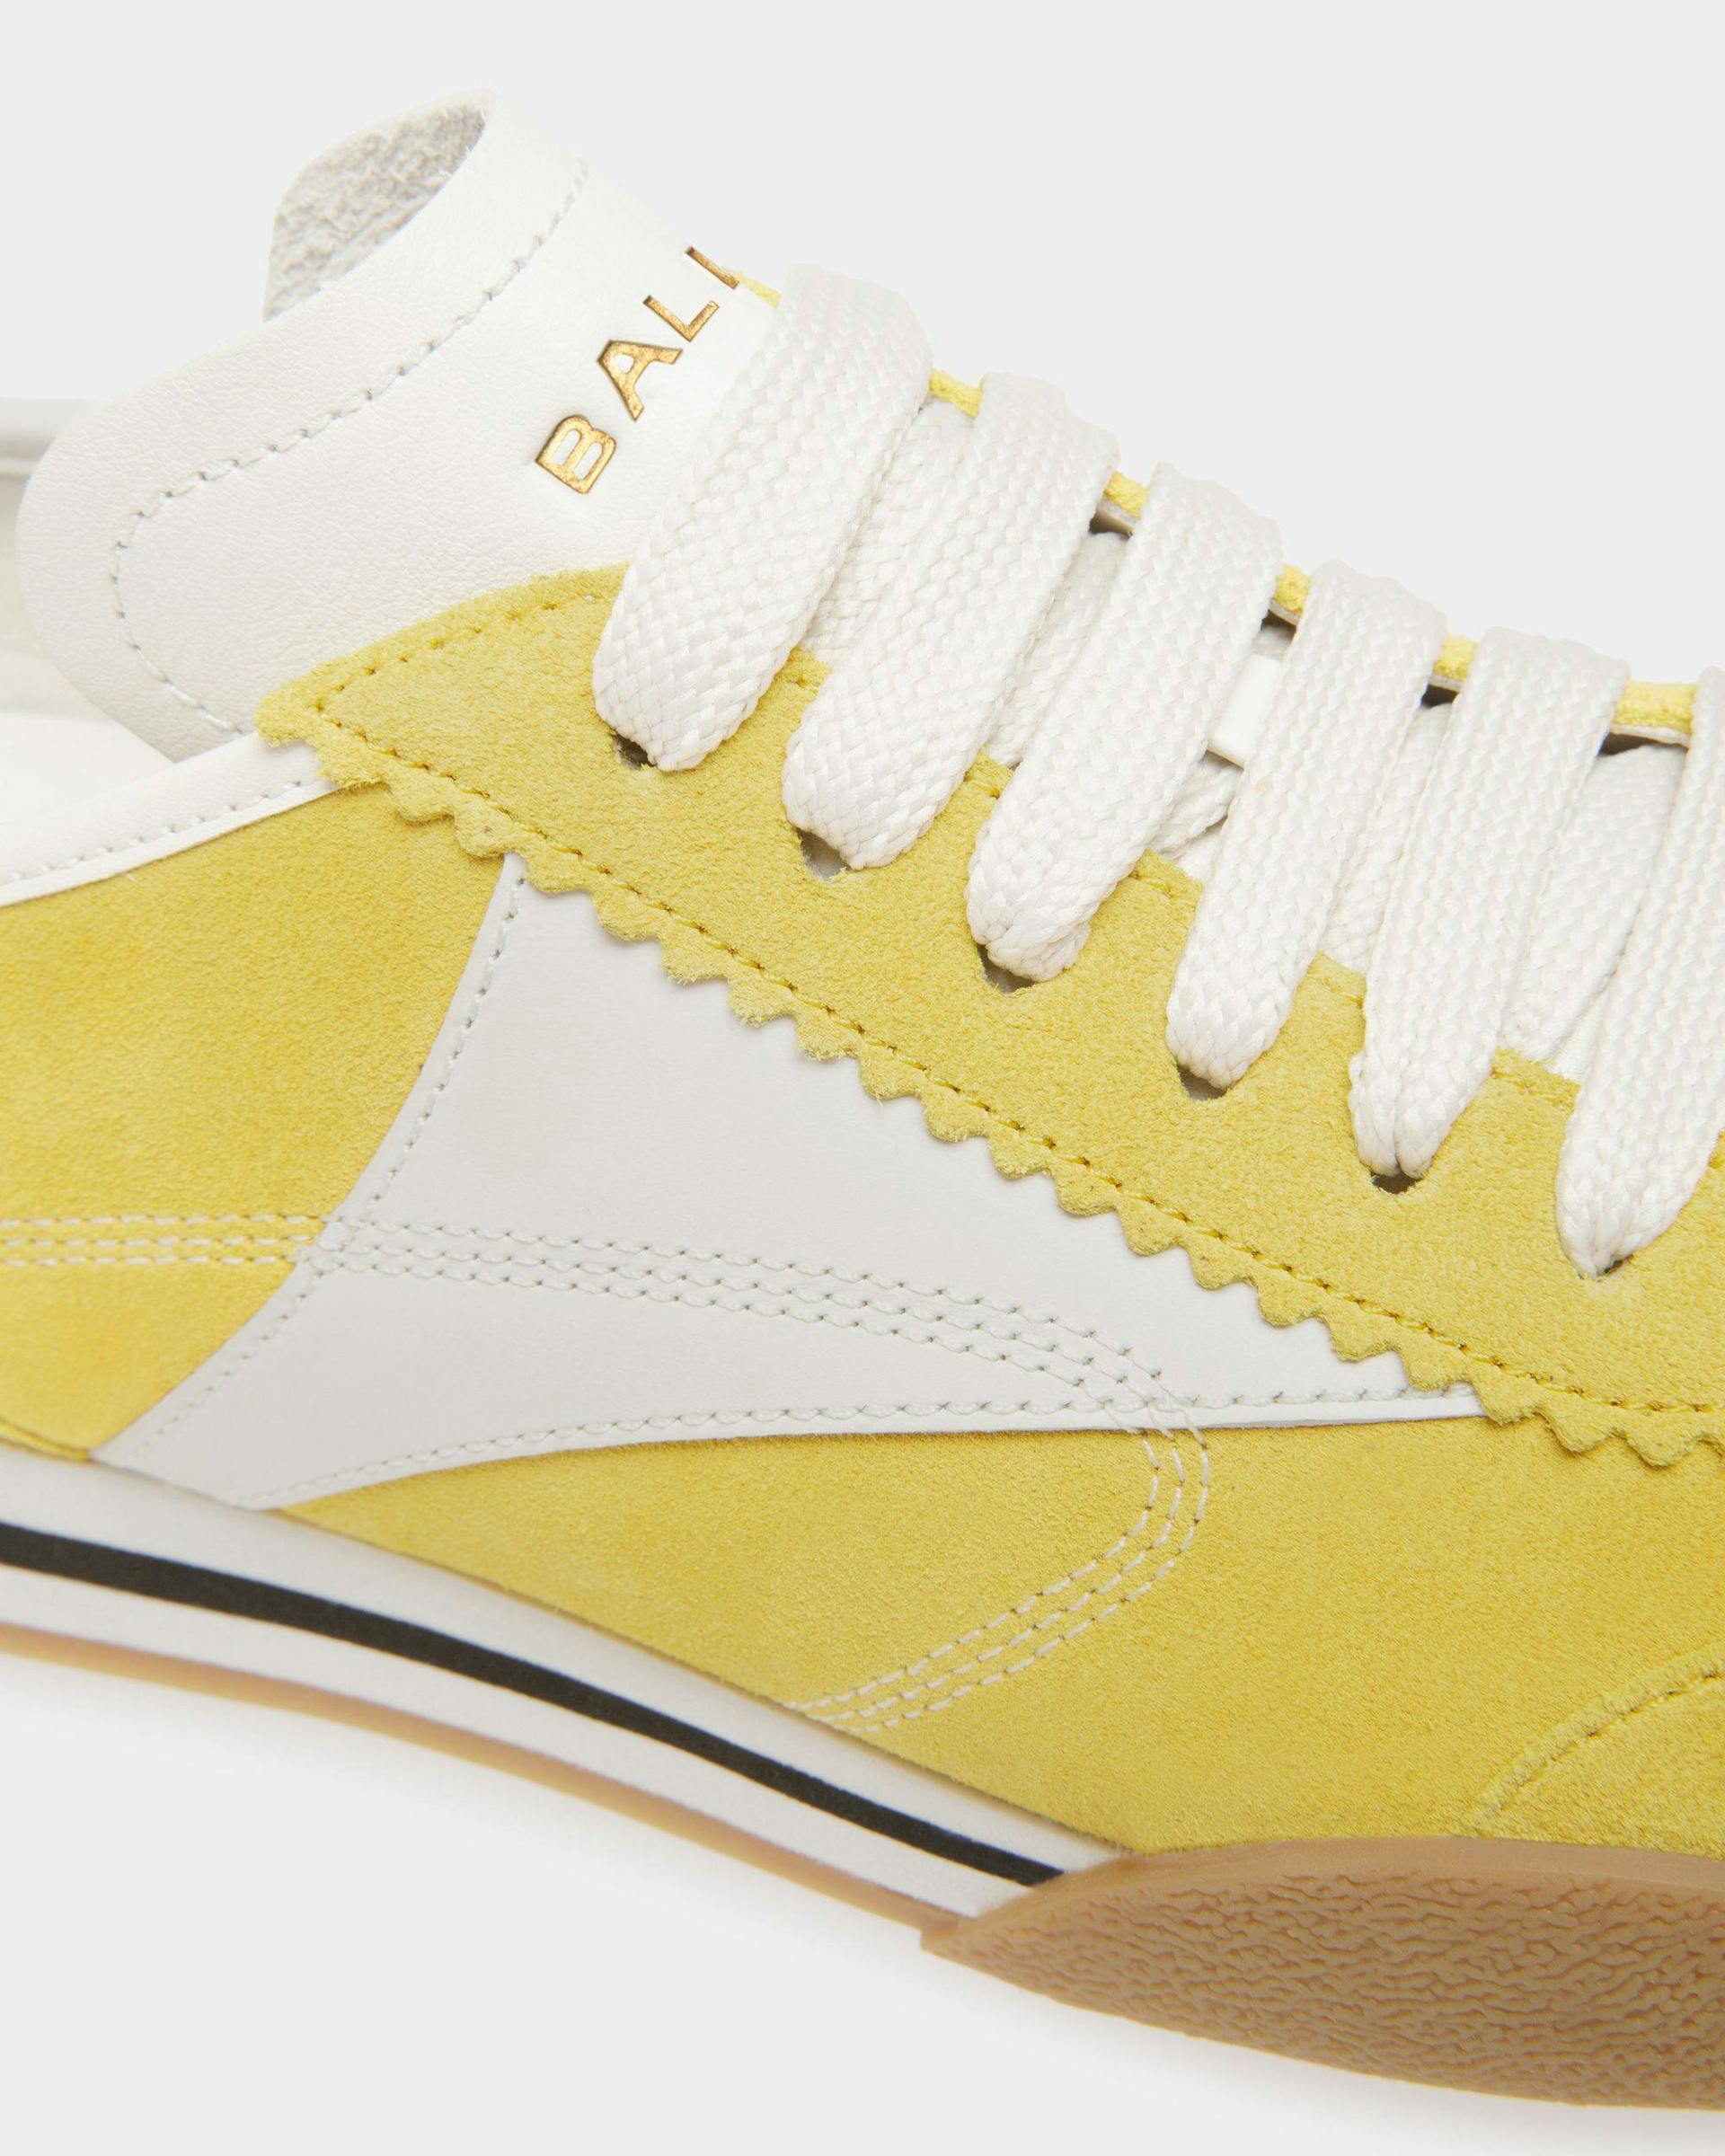 Sussex Sneakers In Yellow And White Leather - Women's - Bally - 06